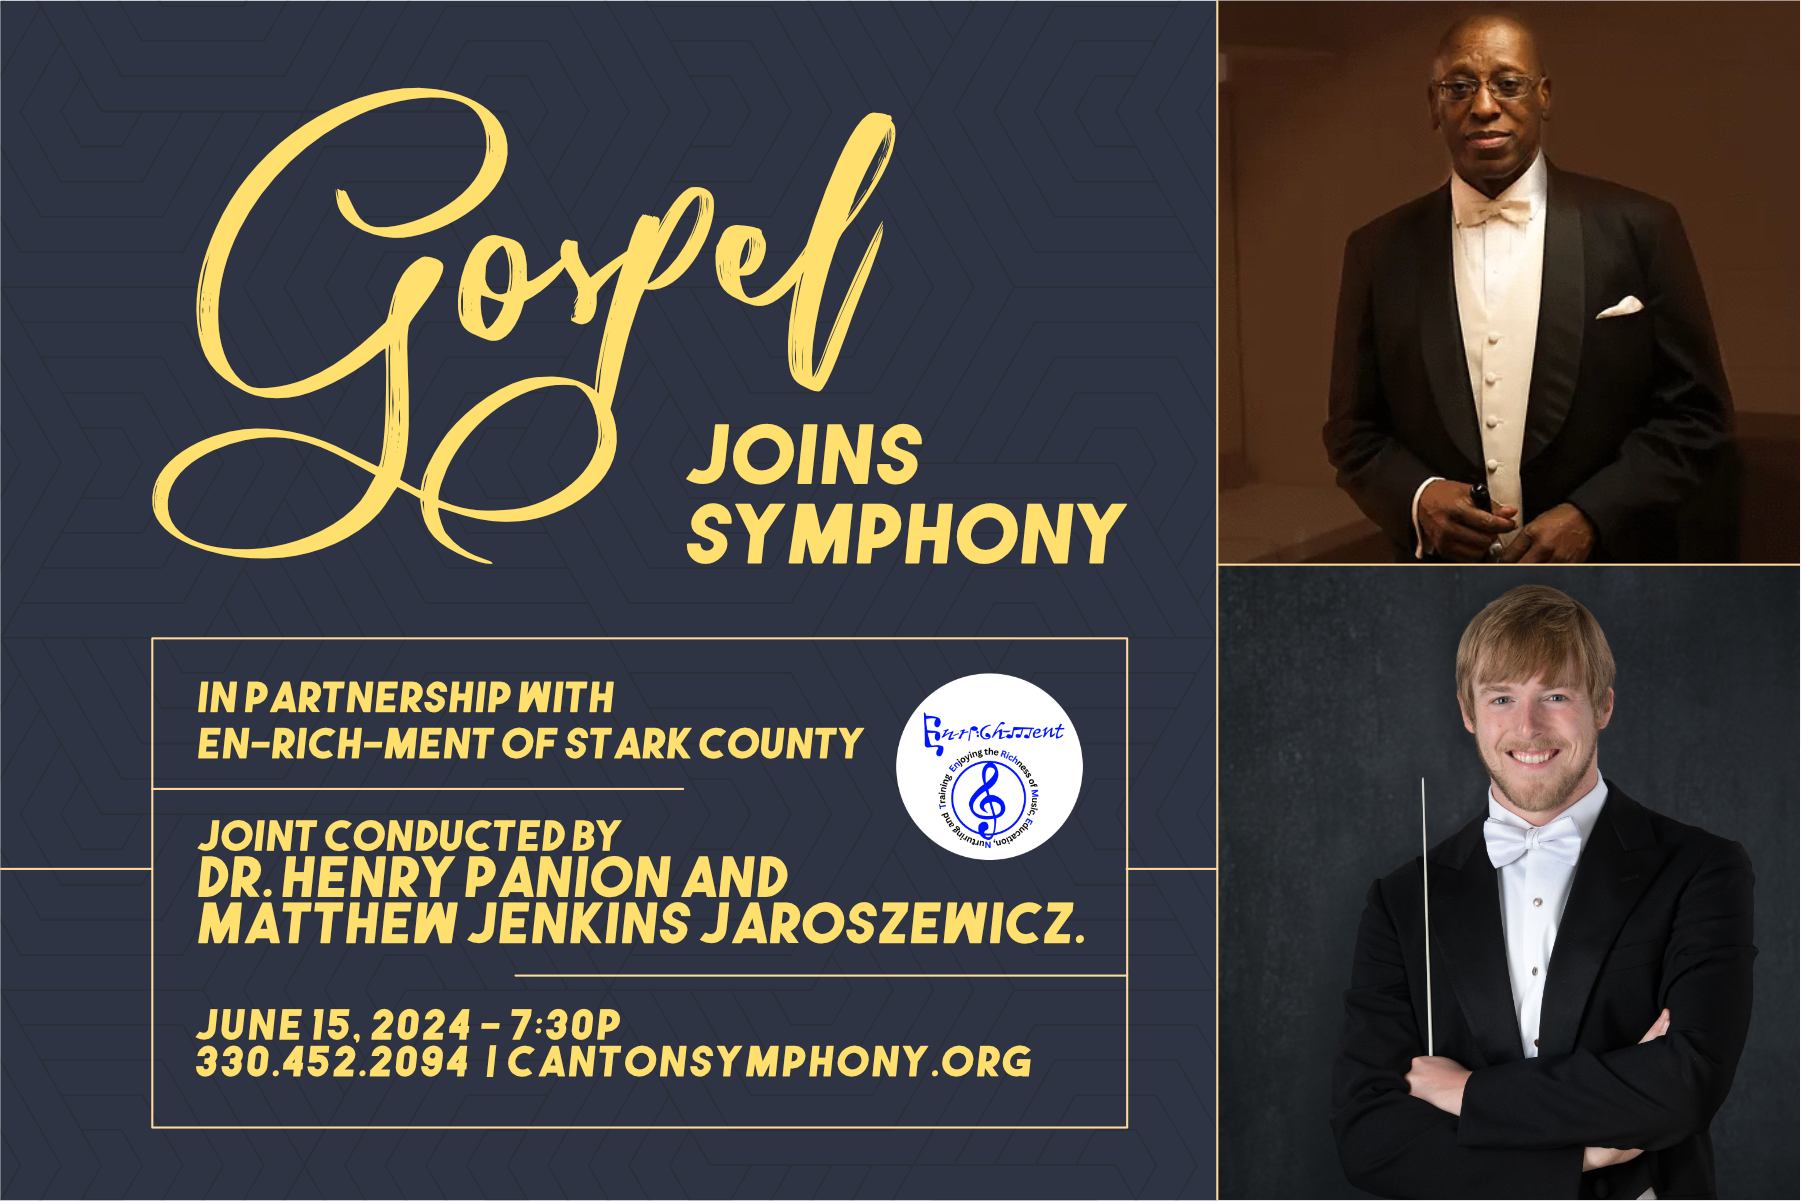 A graphic created for the Gospel Meets the Symphony concert. It includes images of Dr. Henry Panion, III and Matthew Jenkins Jaroszewicz, who will joint-conduct the concert.